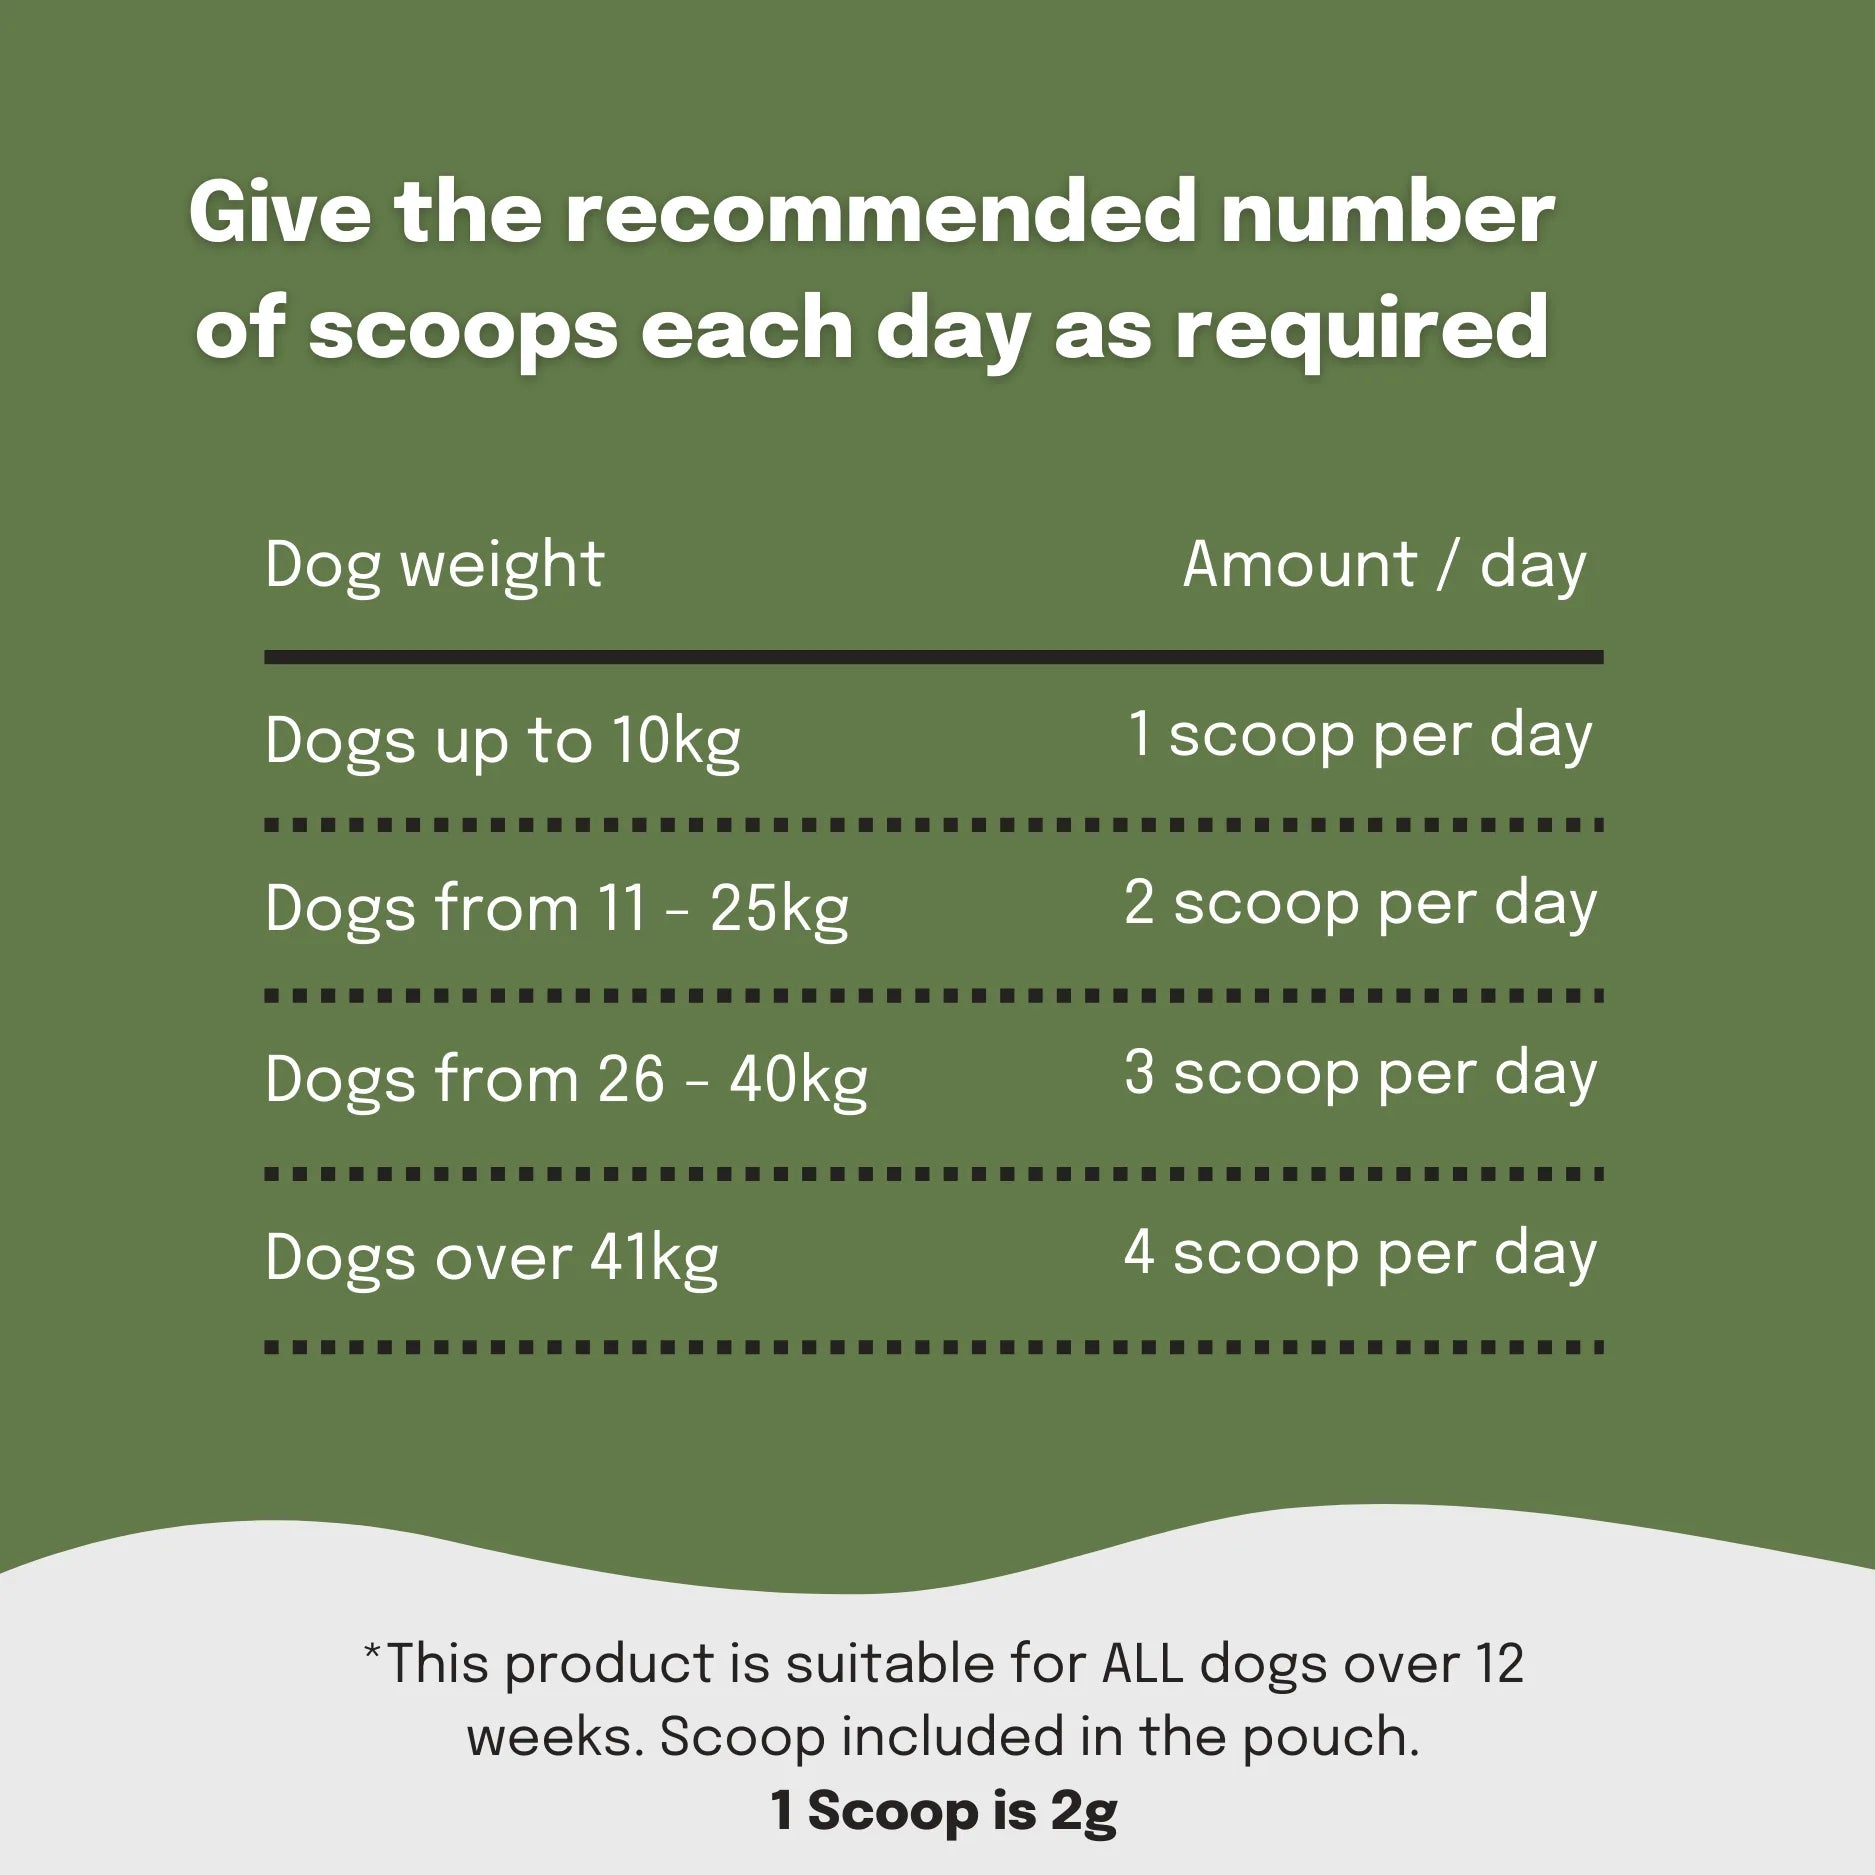 Daily dosage of super Shrooms powdered mushroom supplement for dogs